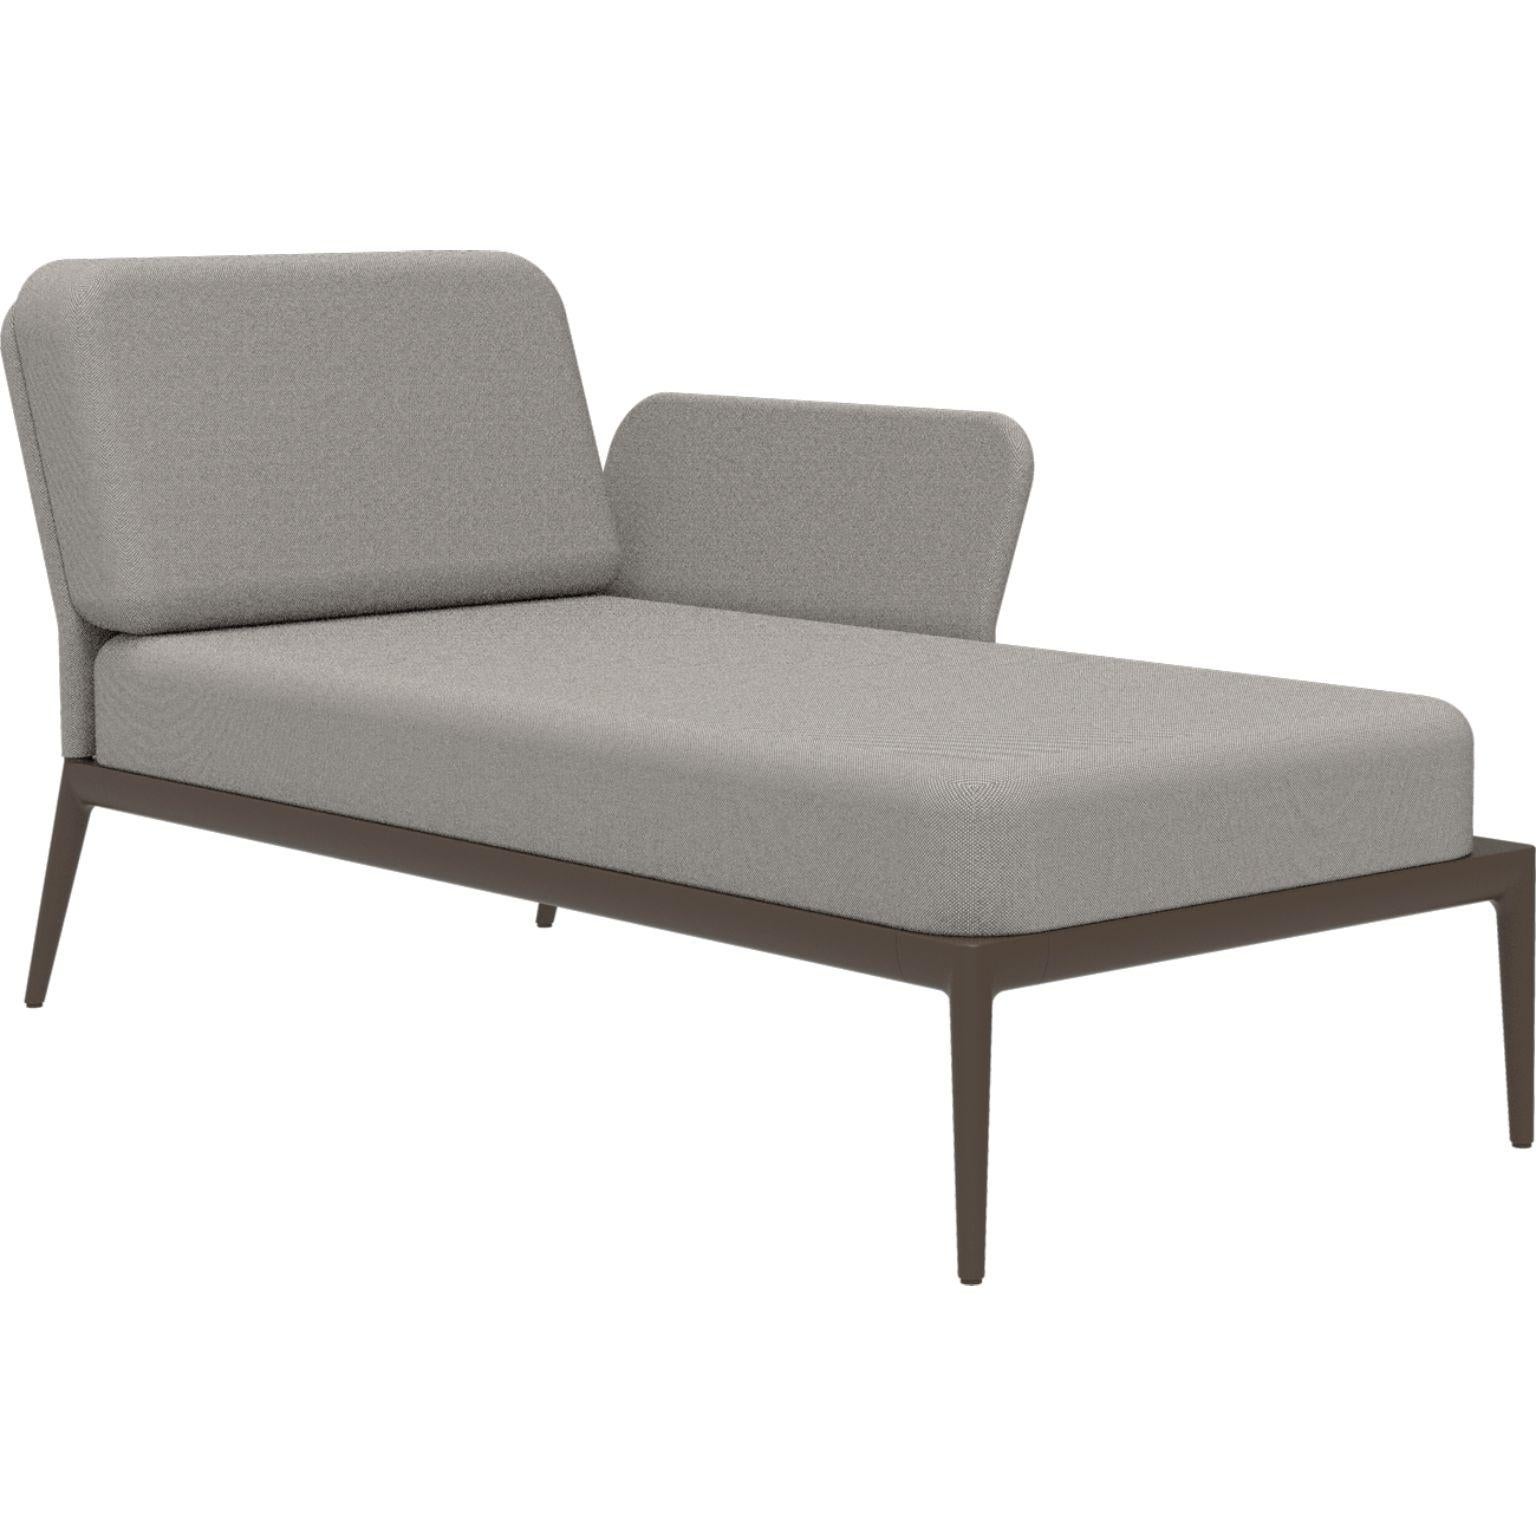 Cover Bronze Left Chaise Longue by MOWEE
Dimensions: D80 x W155 x H81 cm (seat height 42 cm).
Material: Aluminum and upholstery.
Weight: 28 kg.
Also available in different colors and finishes. Please contact us.

An unmistakable collection for